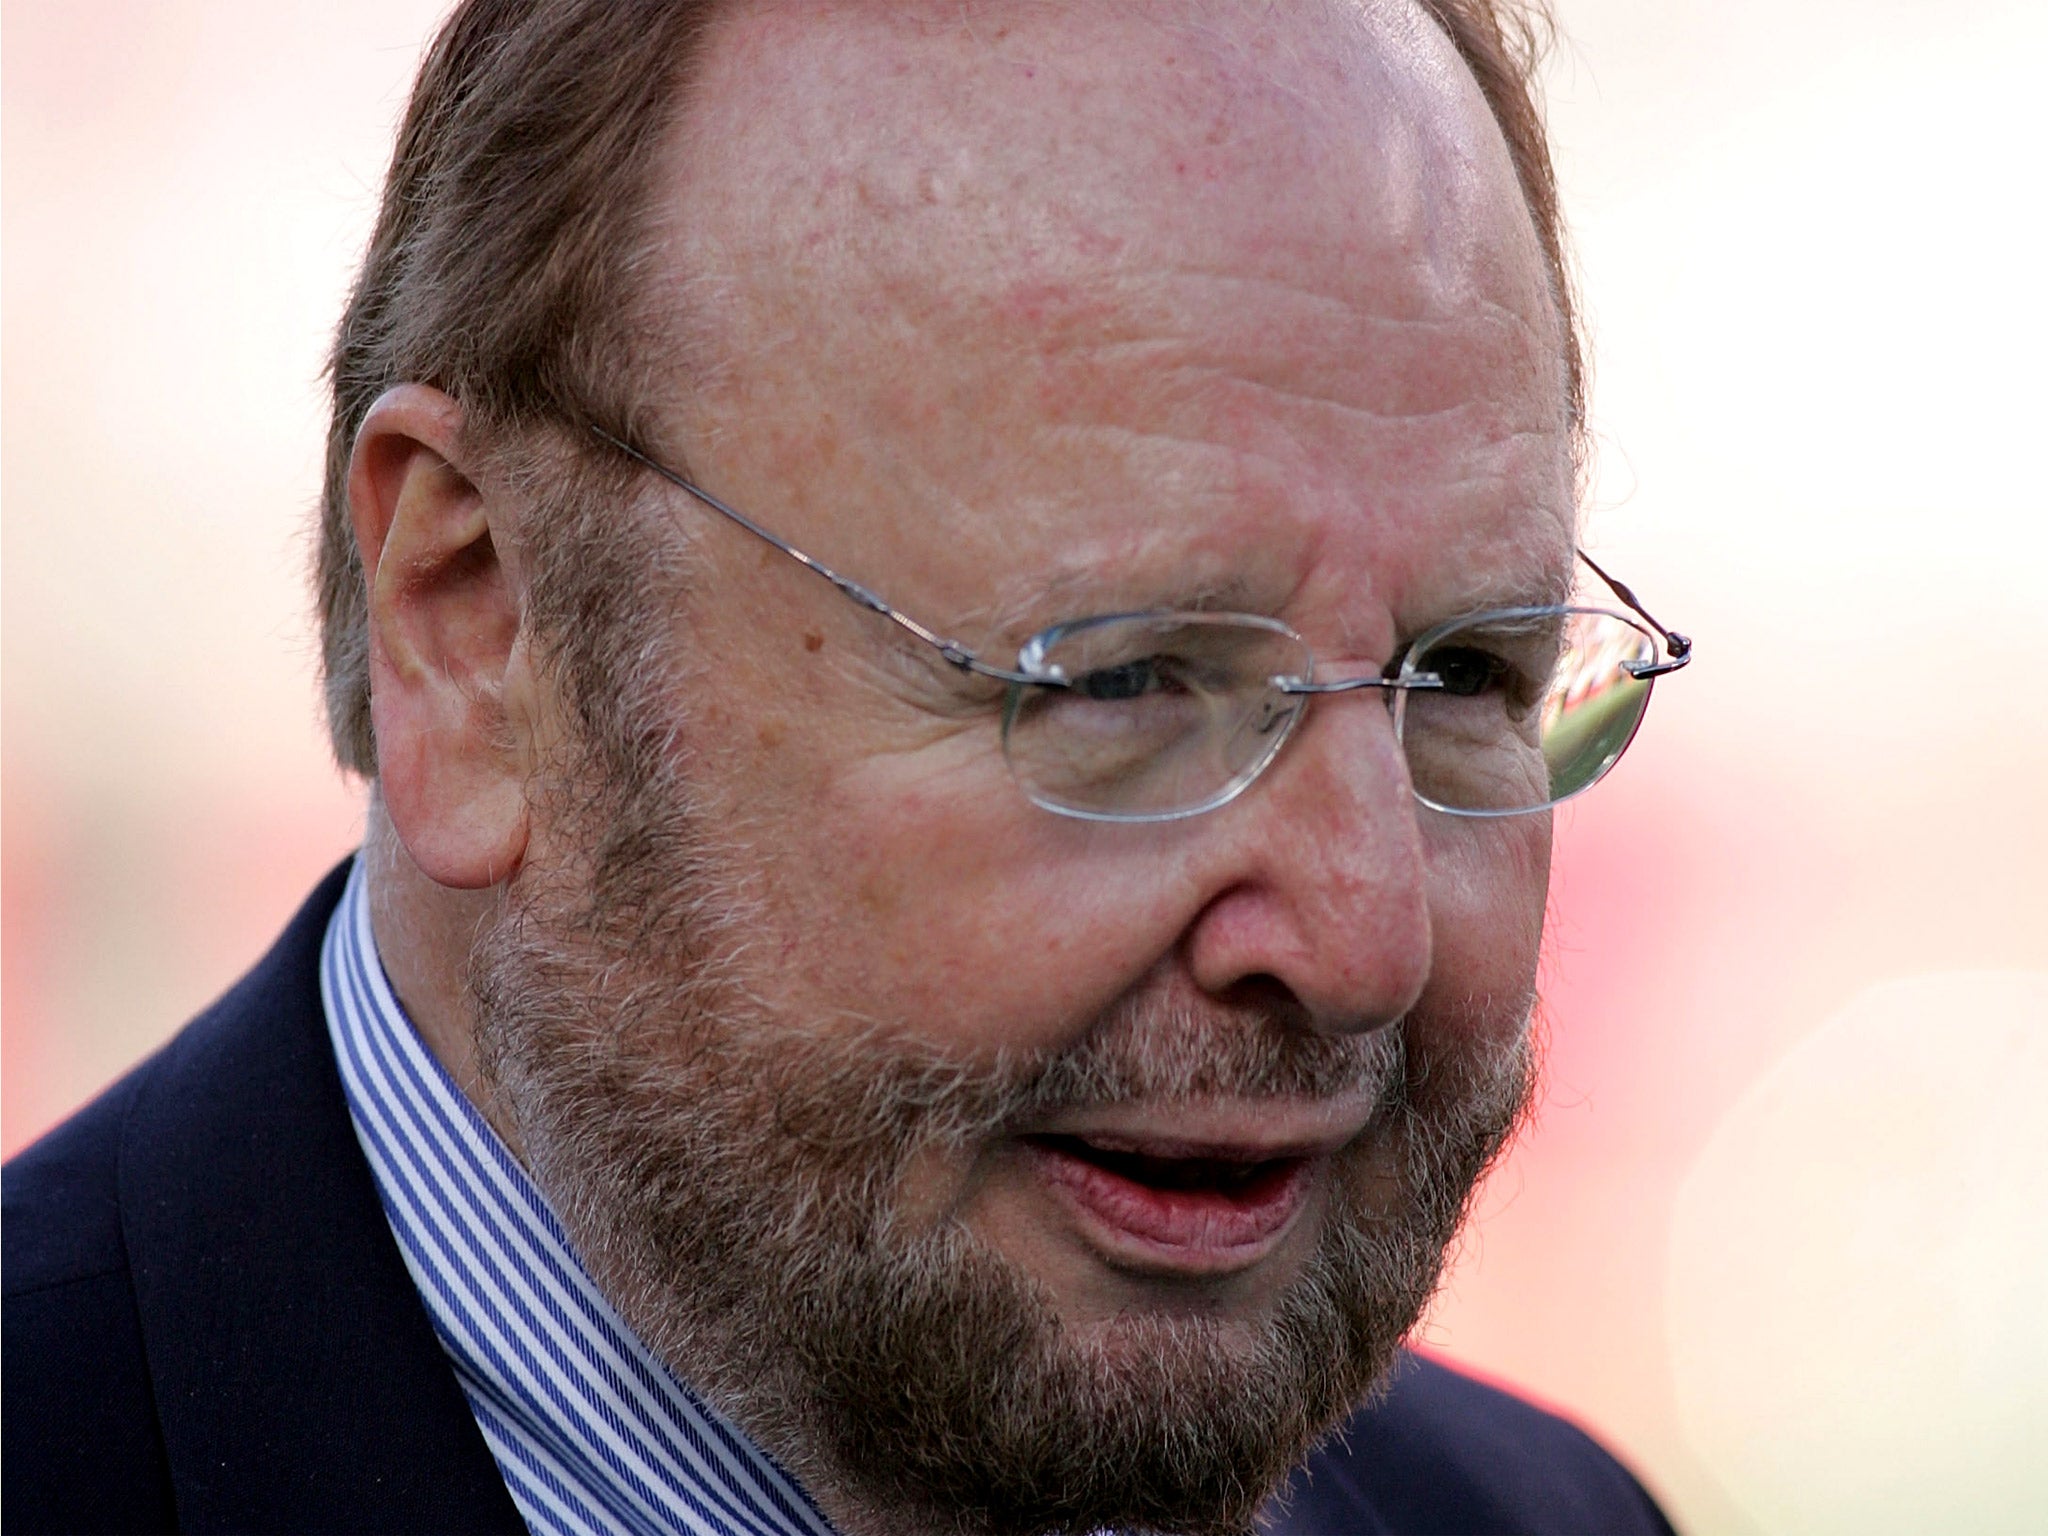 Malcolm Glazer took over Manchester United in 2005 to bitter opposition from fans